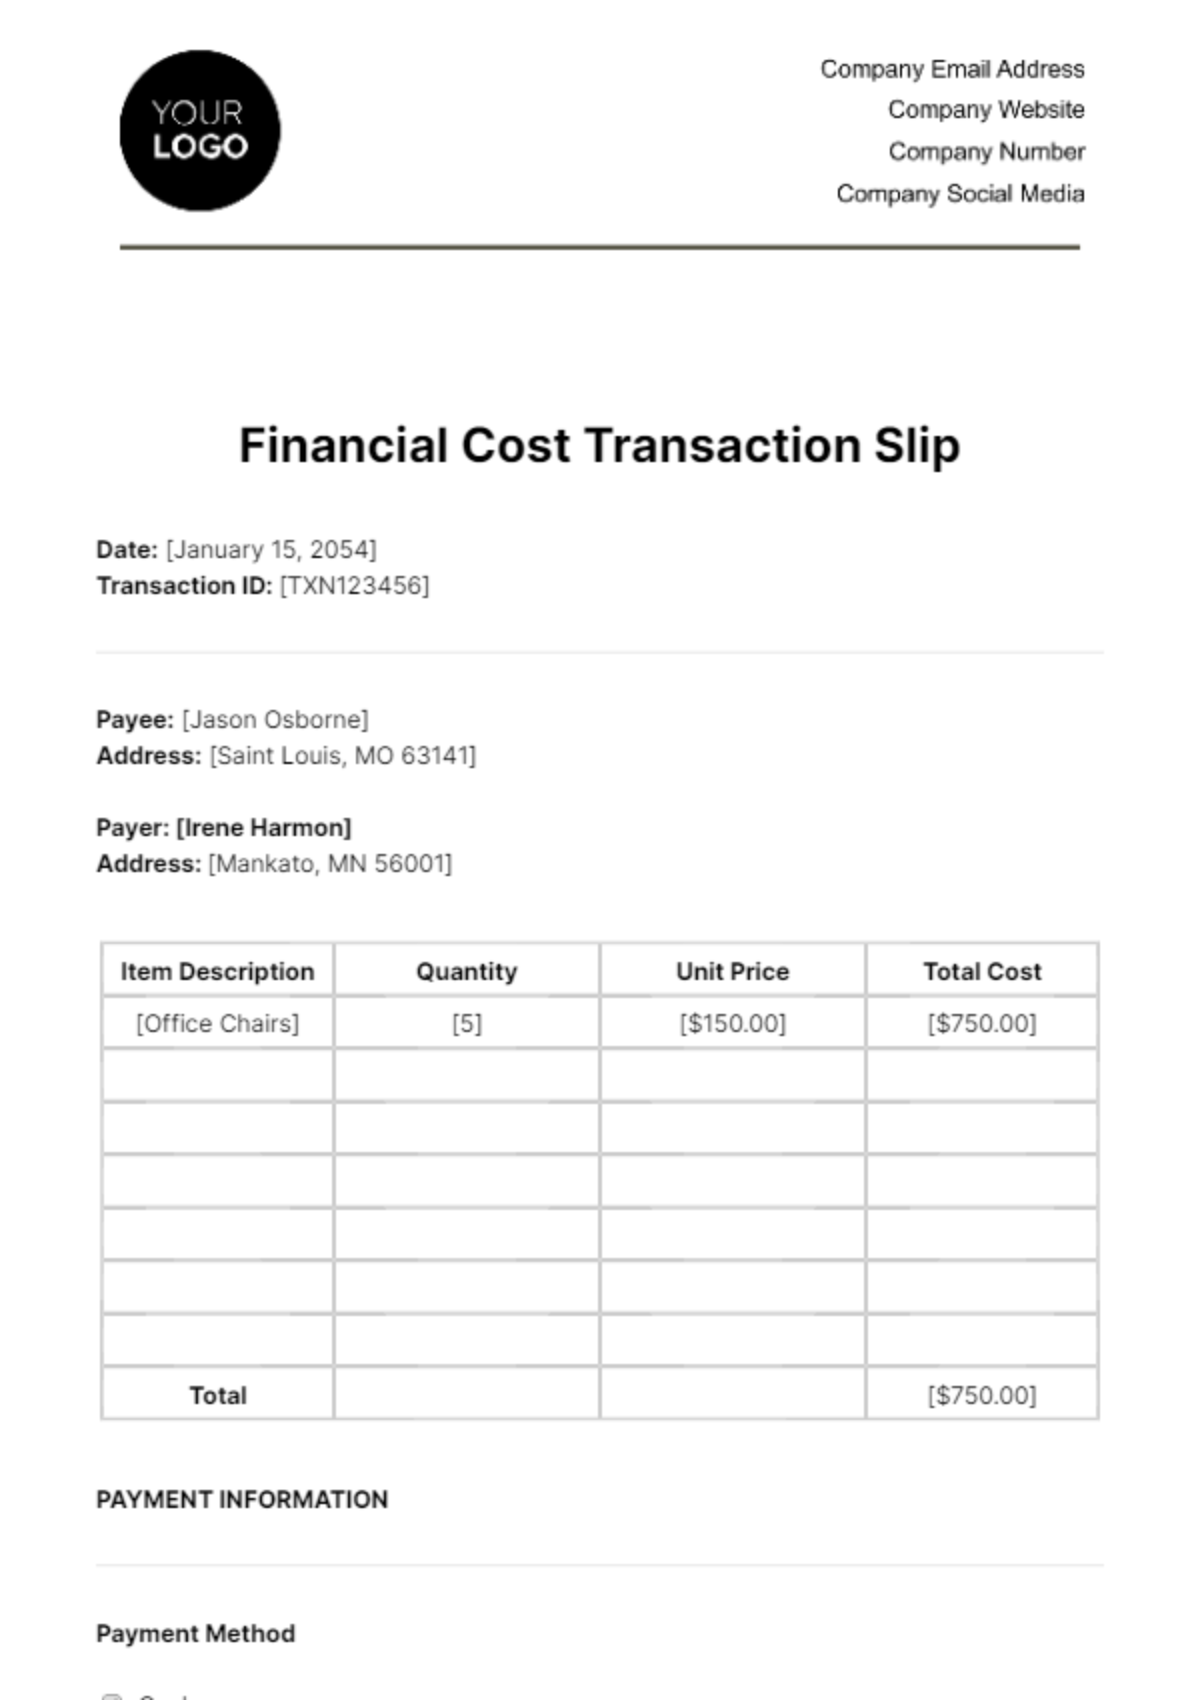 Financial Cost Transaction Slip Template